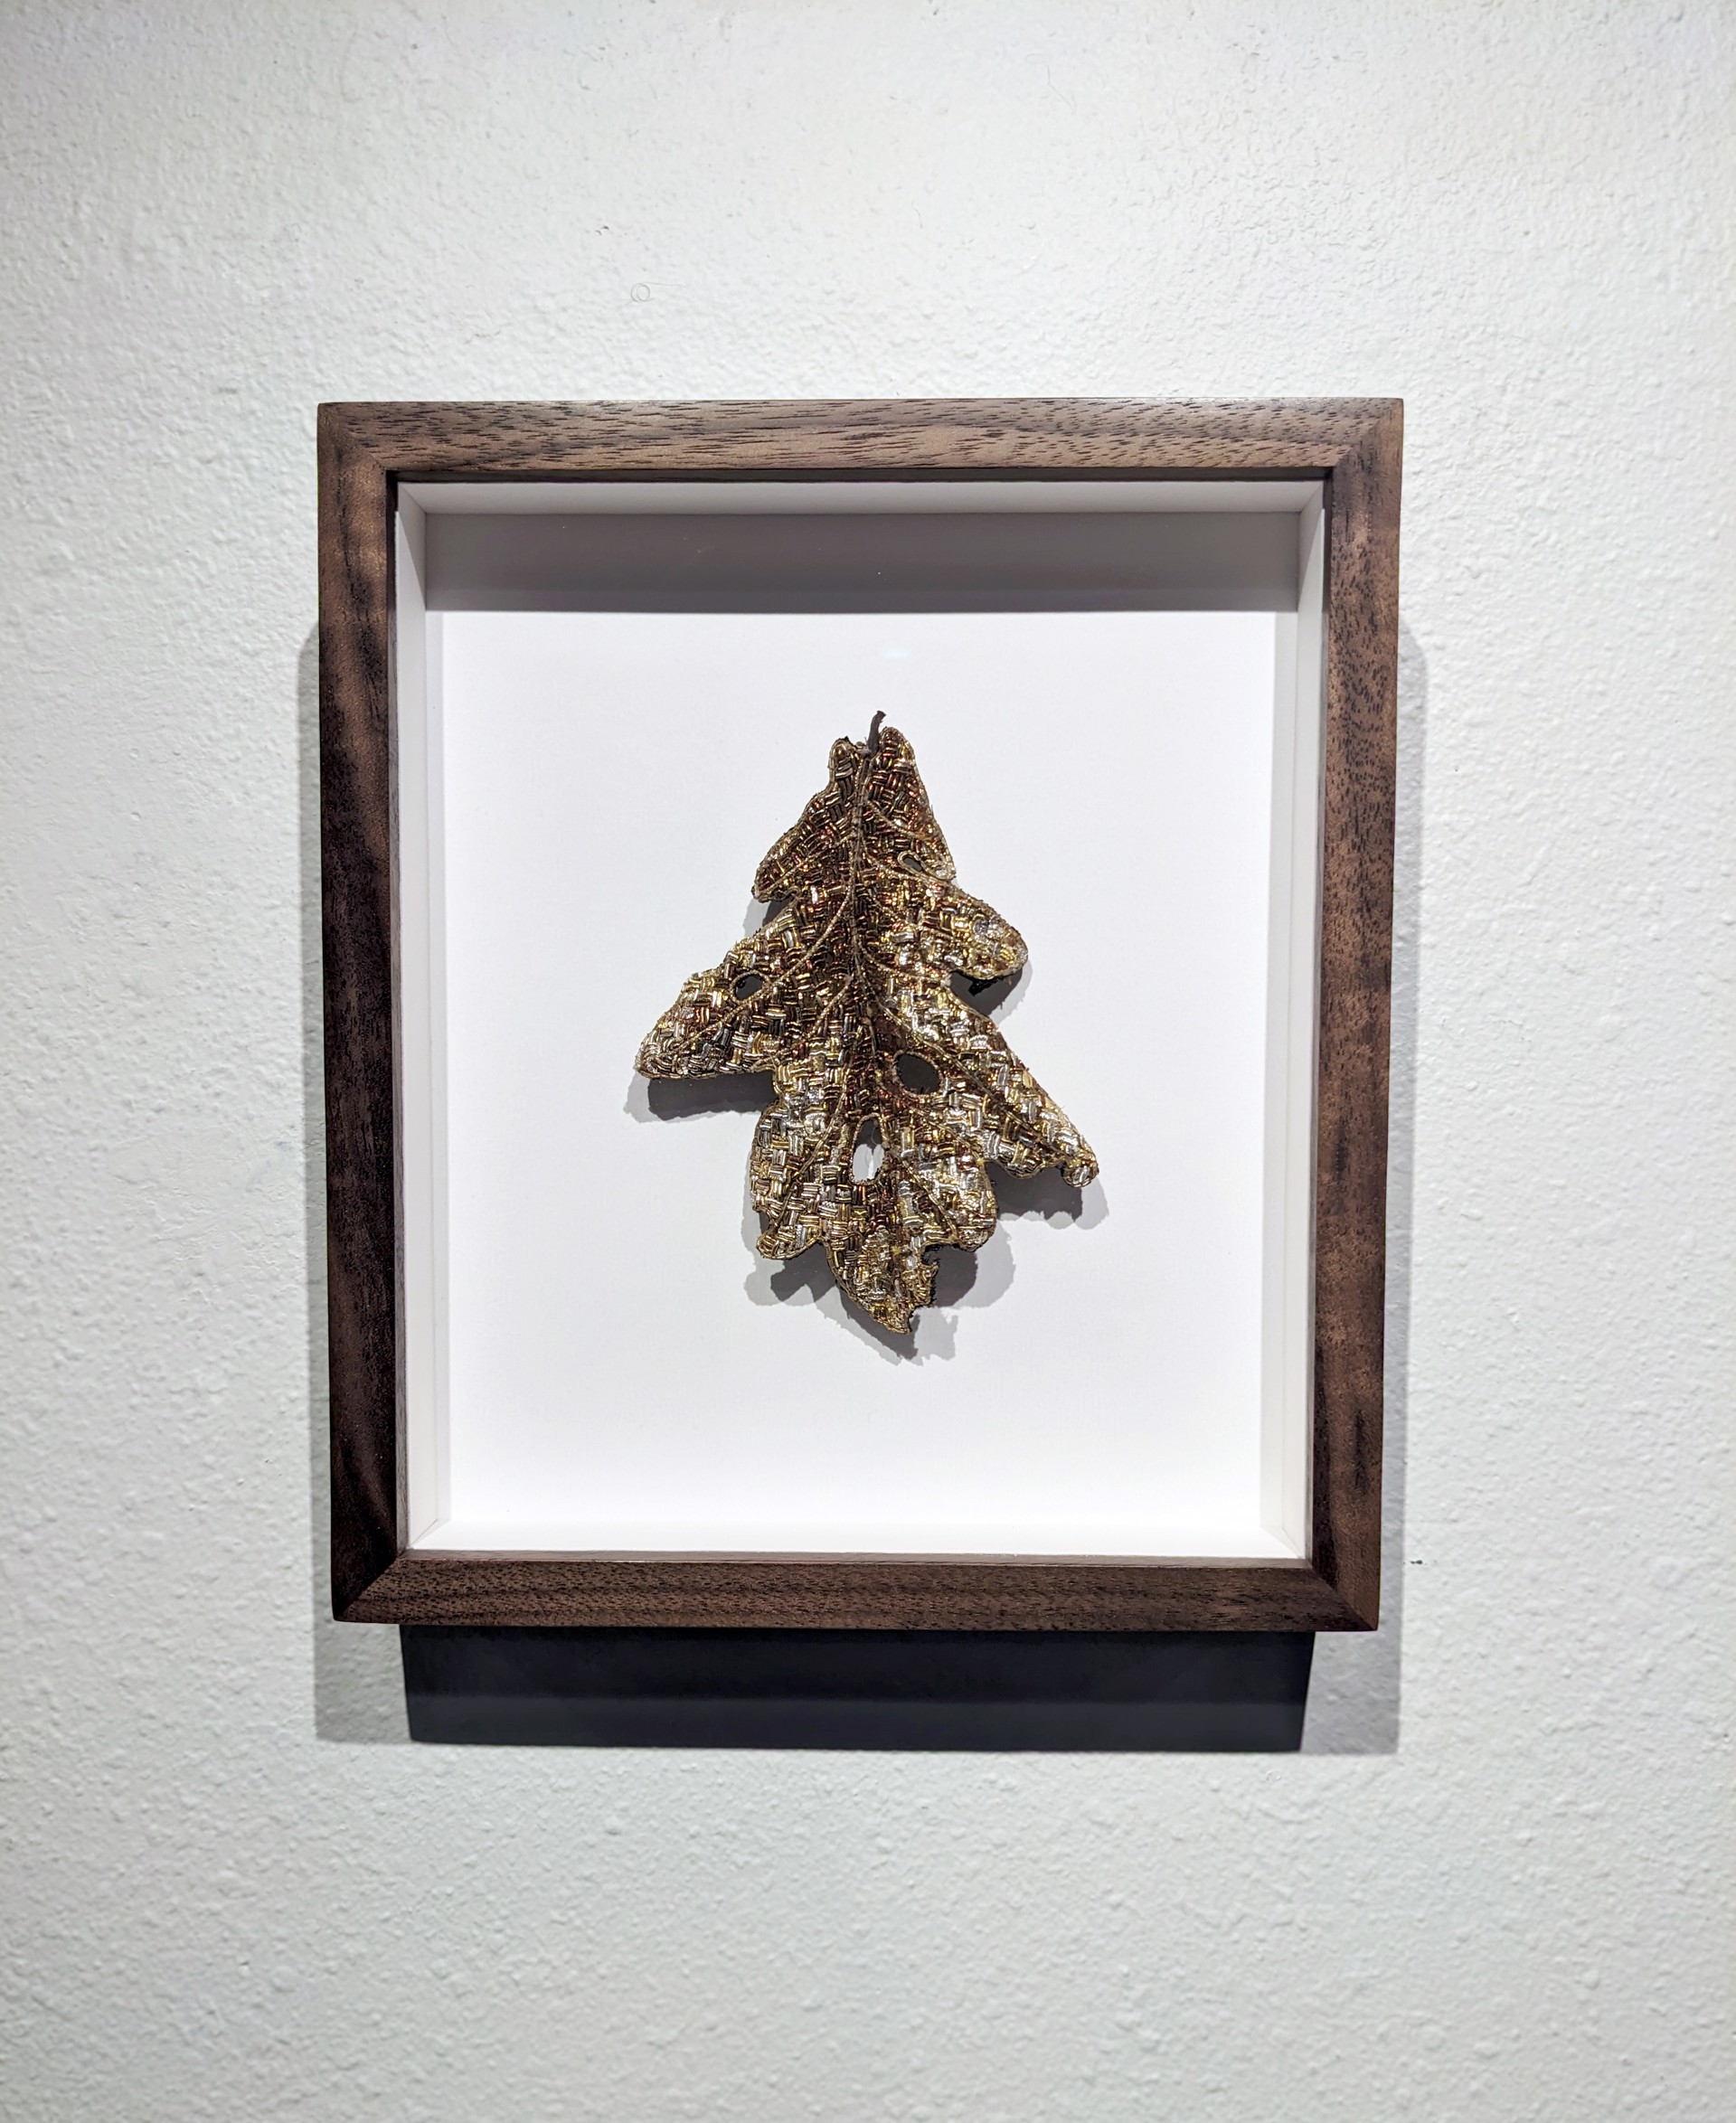 The Impermanence of Life: Oak Leaf IV by Tiao Nithakhong Somsanith